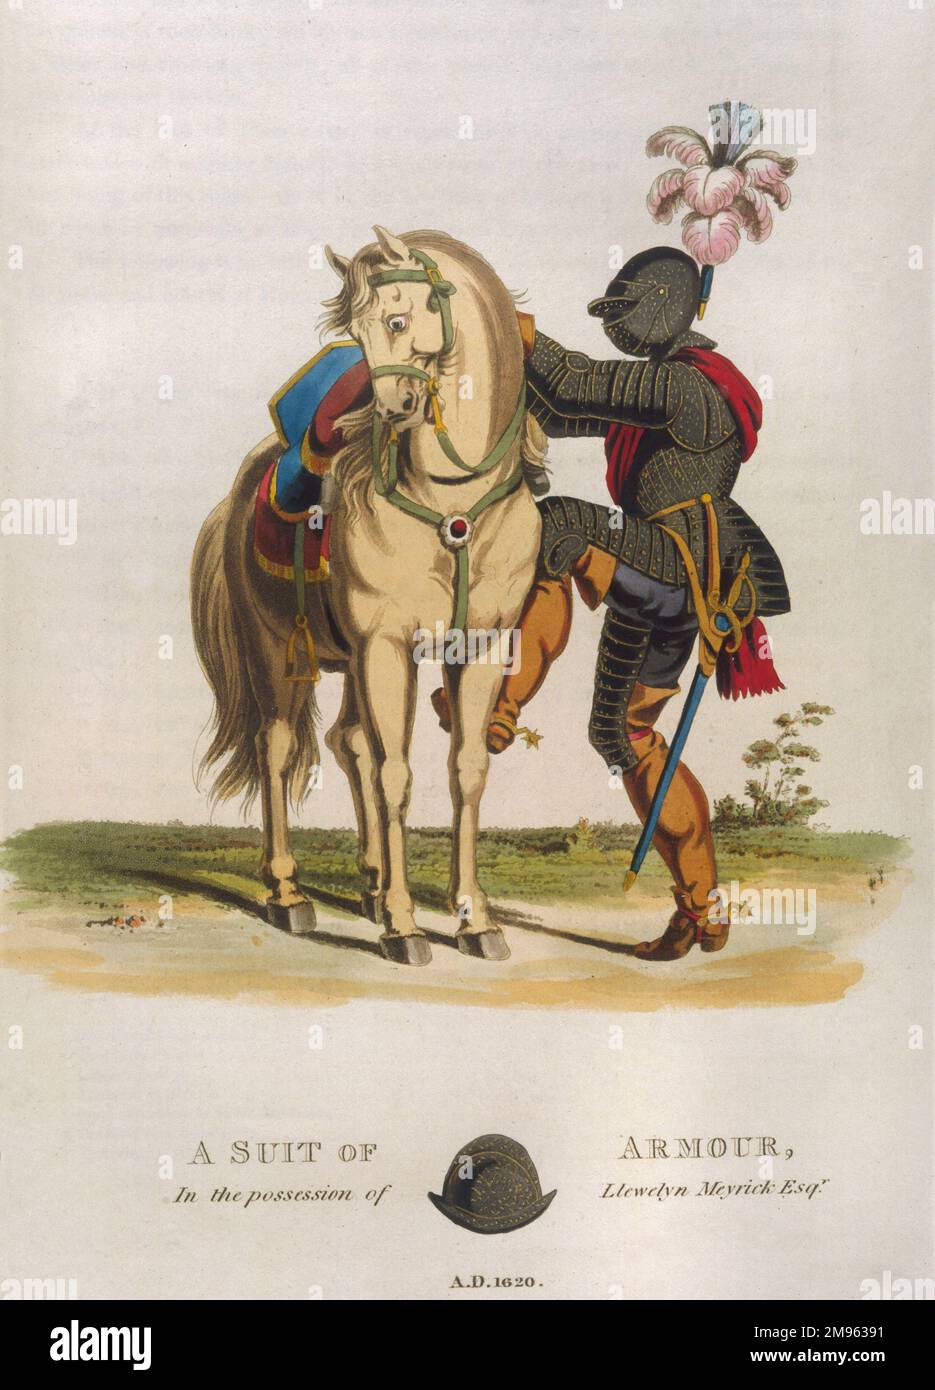 A knight in armour mounts his horse. Stock Photo